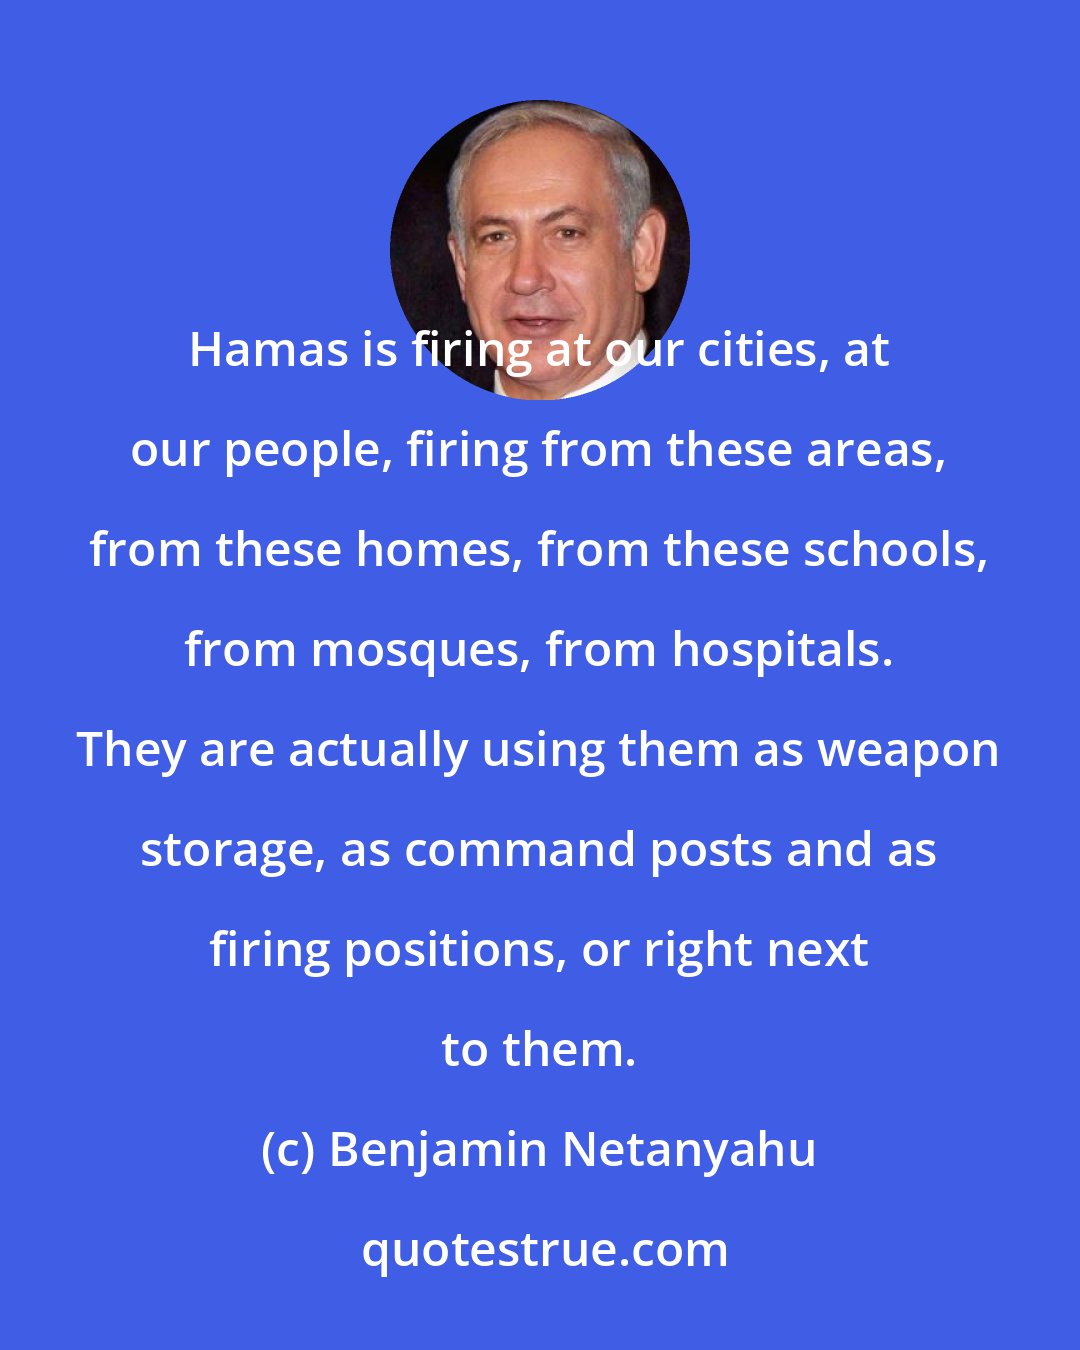 Benjamin Netanyahu: Hamas is firing at our cities, at our people, firing from these areas, from these homes, from these schools, from mosques, from hospitals. They are actually using them as weapon storage, as command posts and as firing positions, or right next to them.